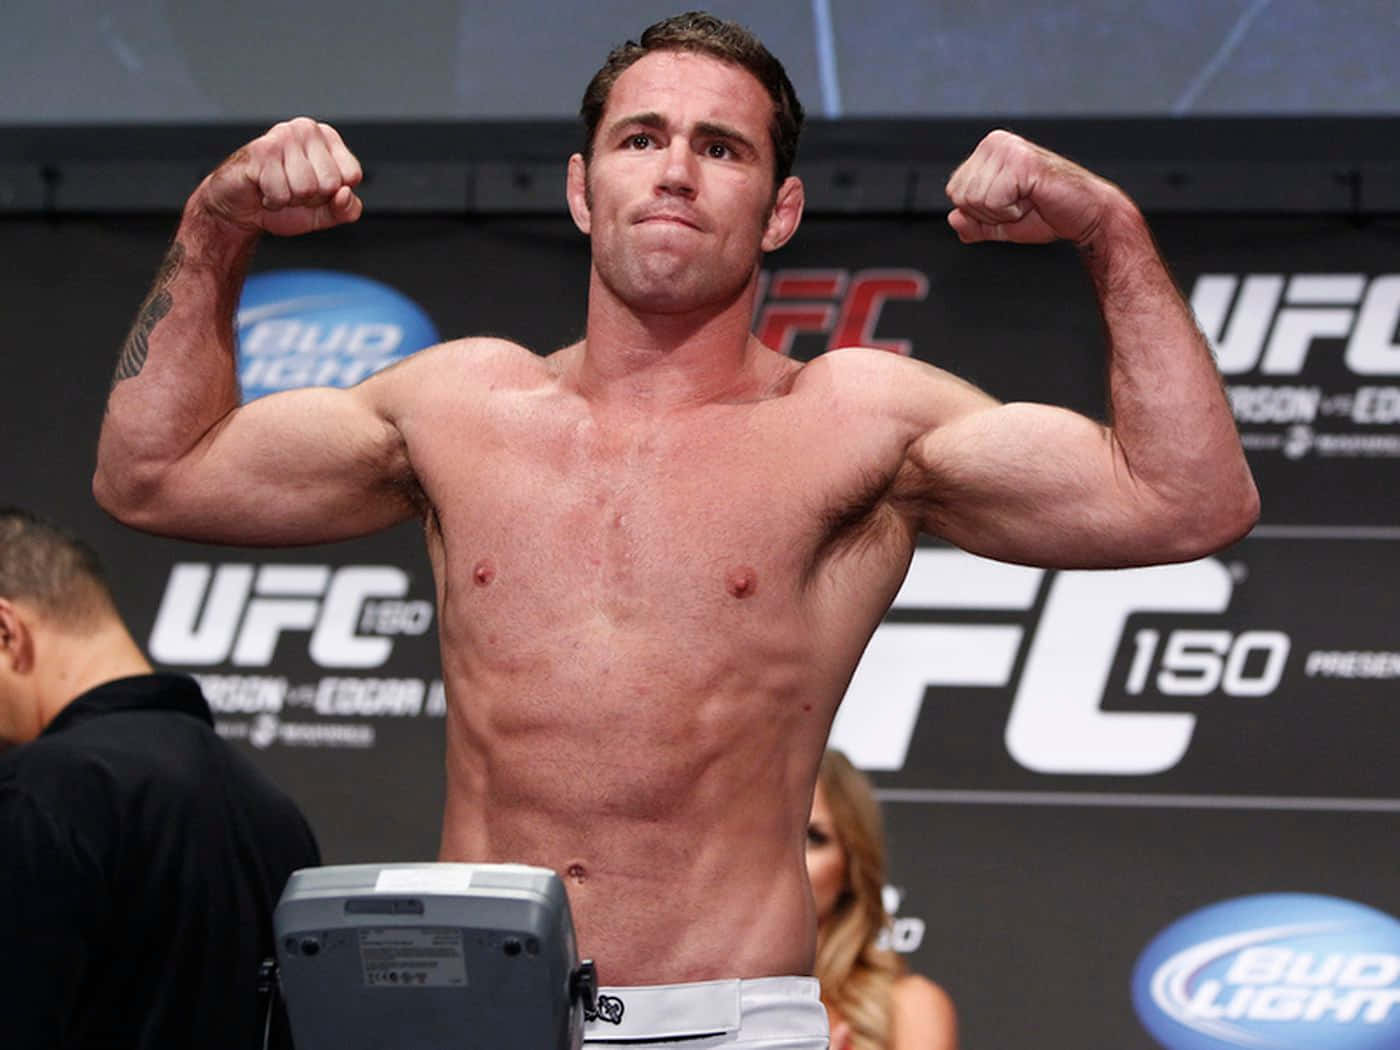 Jake Shields in action at UFC 150, August 2012 Wallpaper